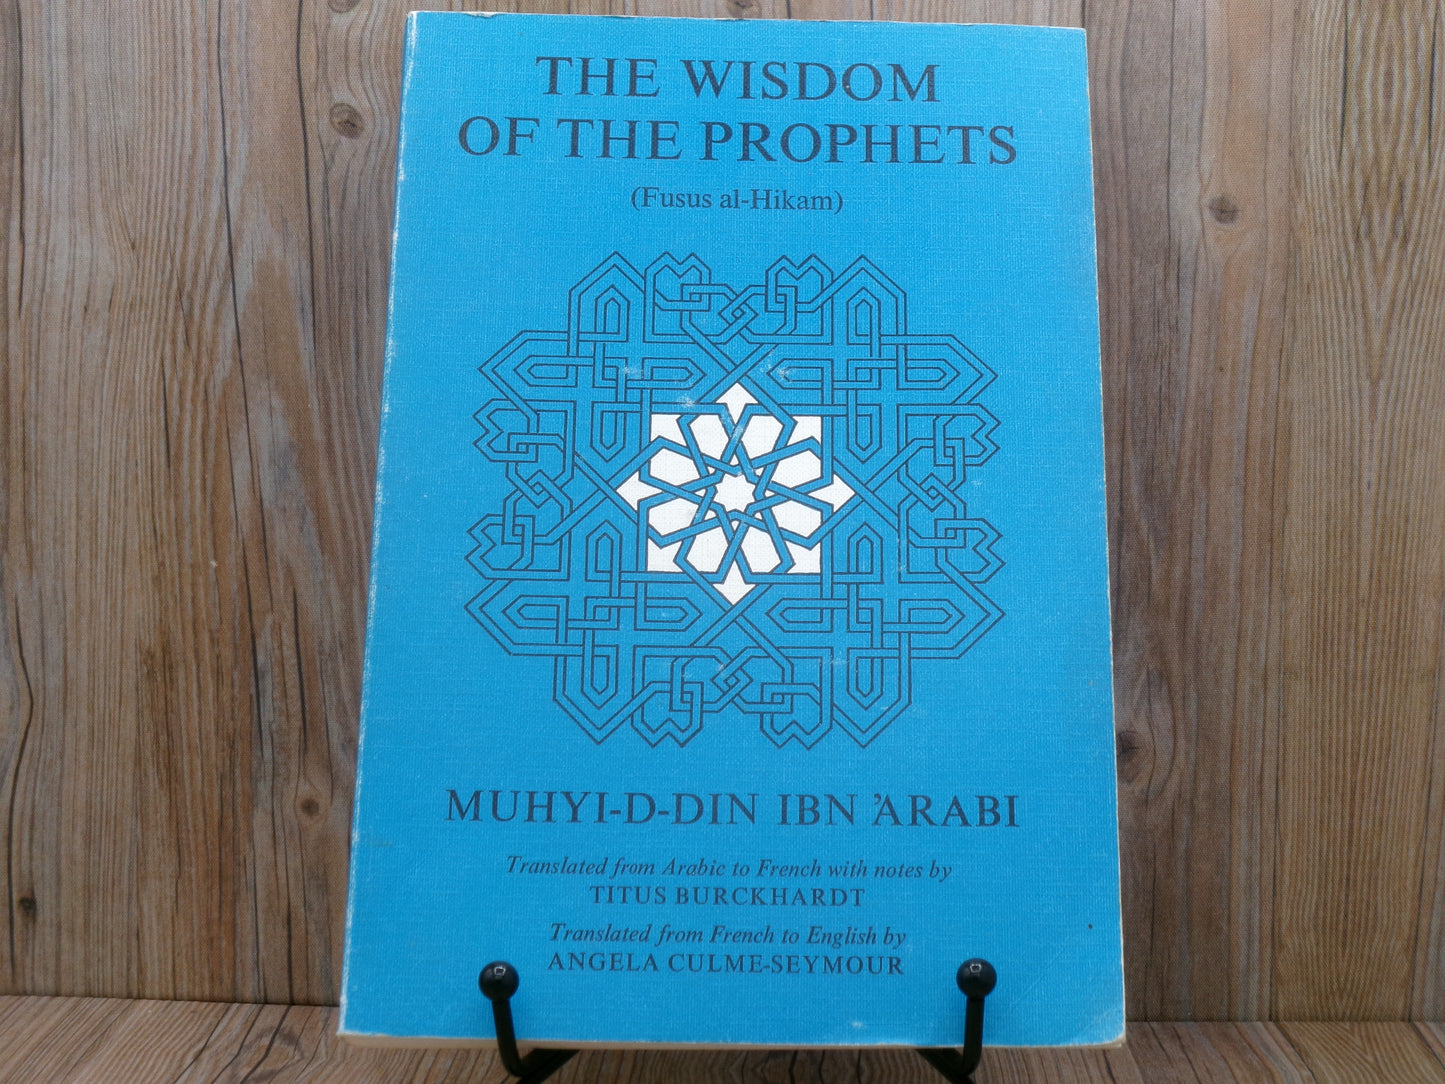 The Wisdom of the Prophets by Muhyi-D-Din Ibn 'Arabi